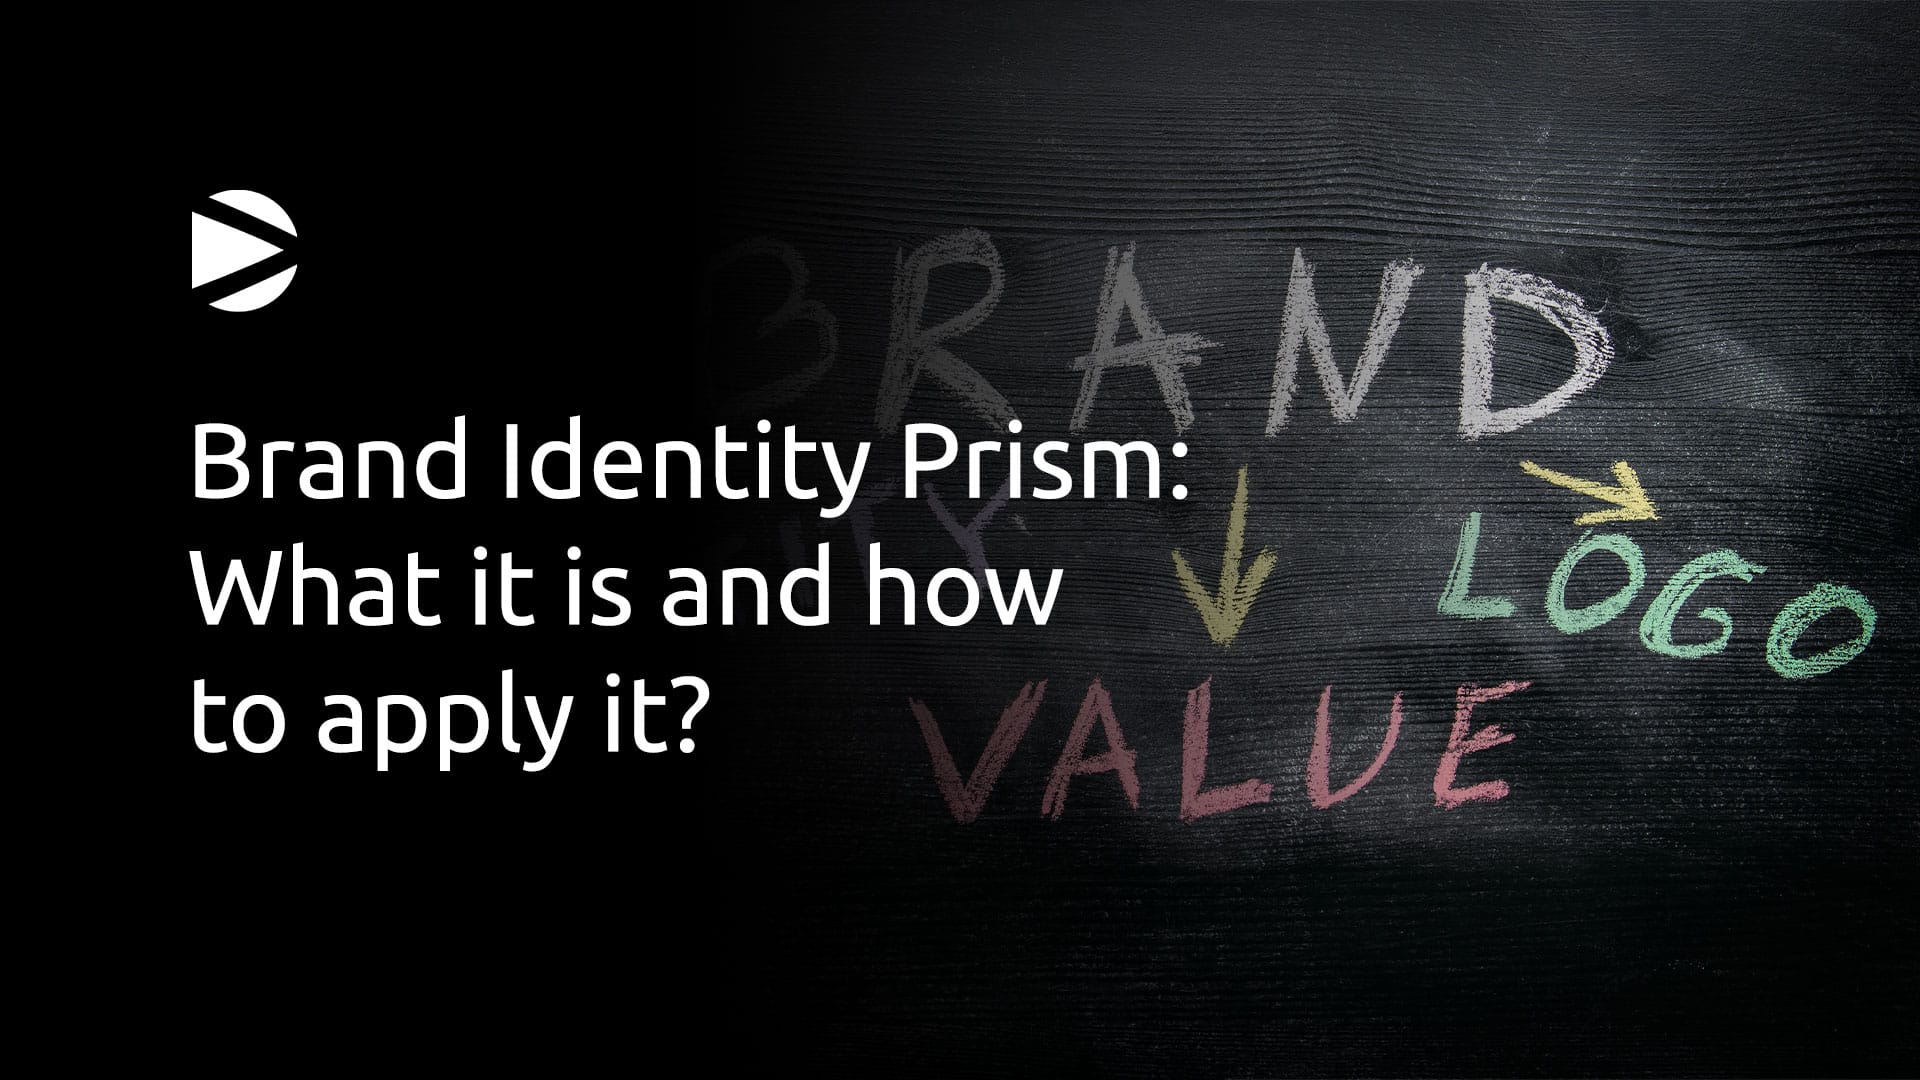 Brand Identity Prism: What it is and how to apply it?